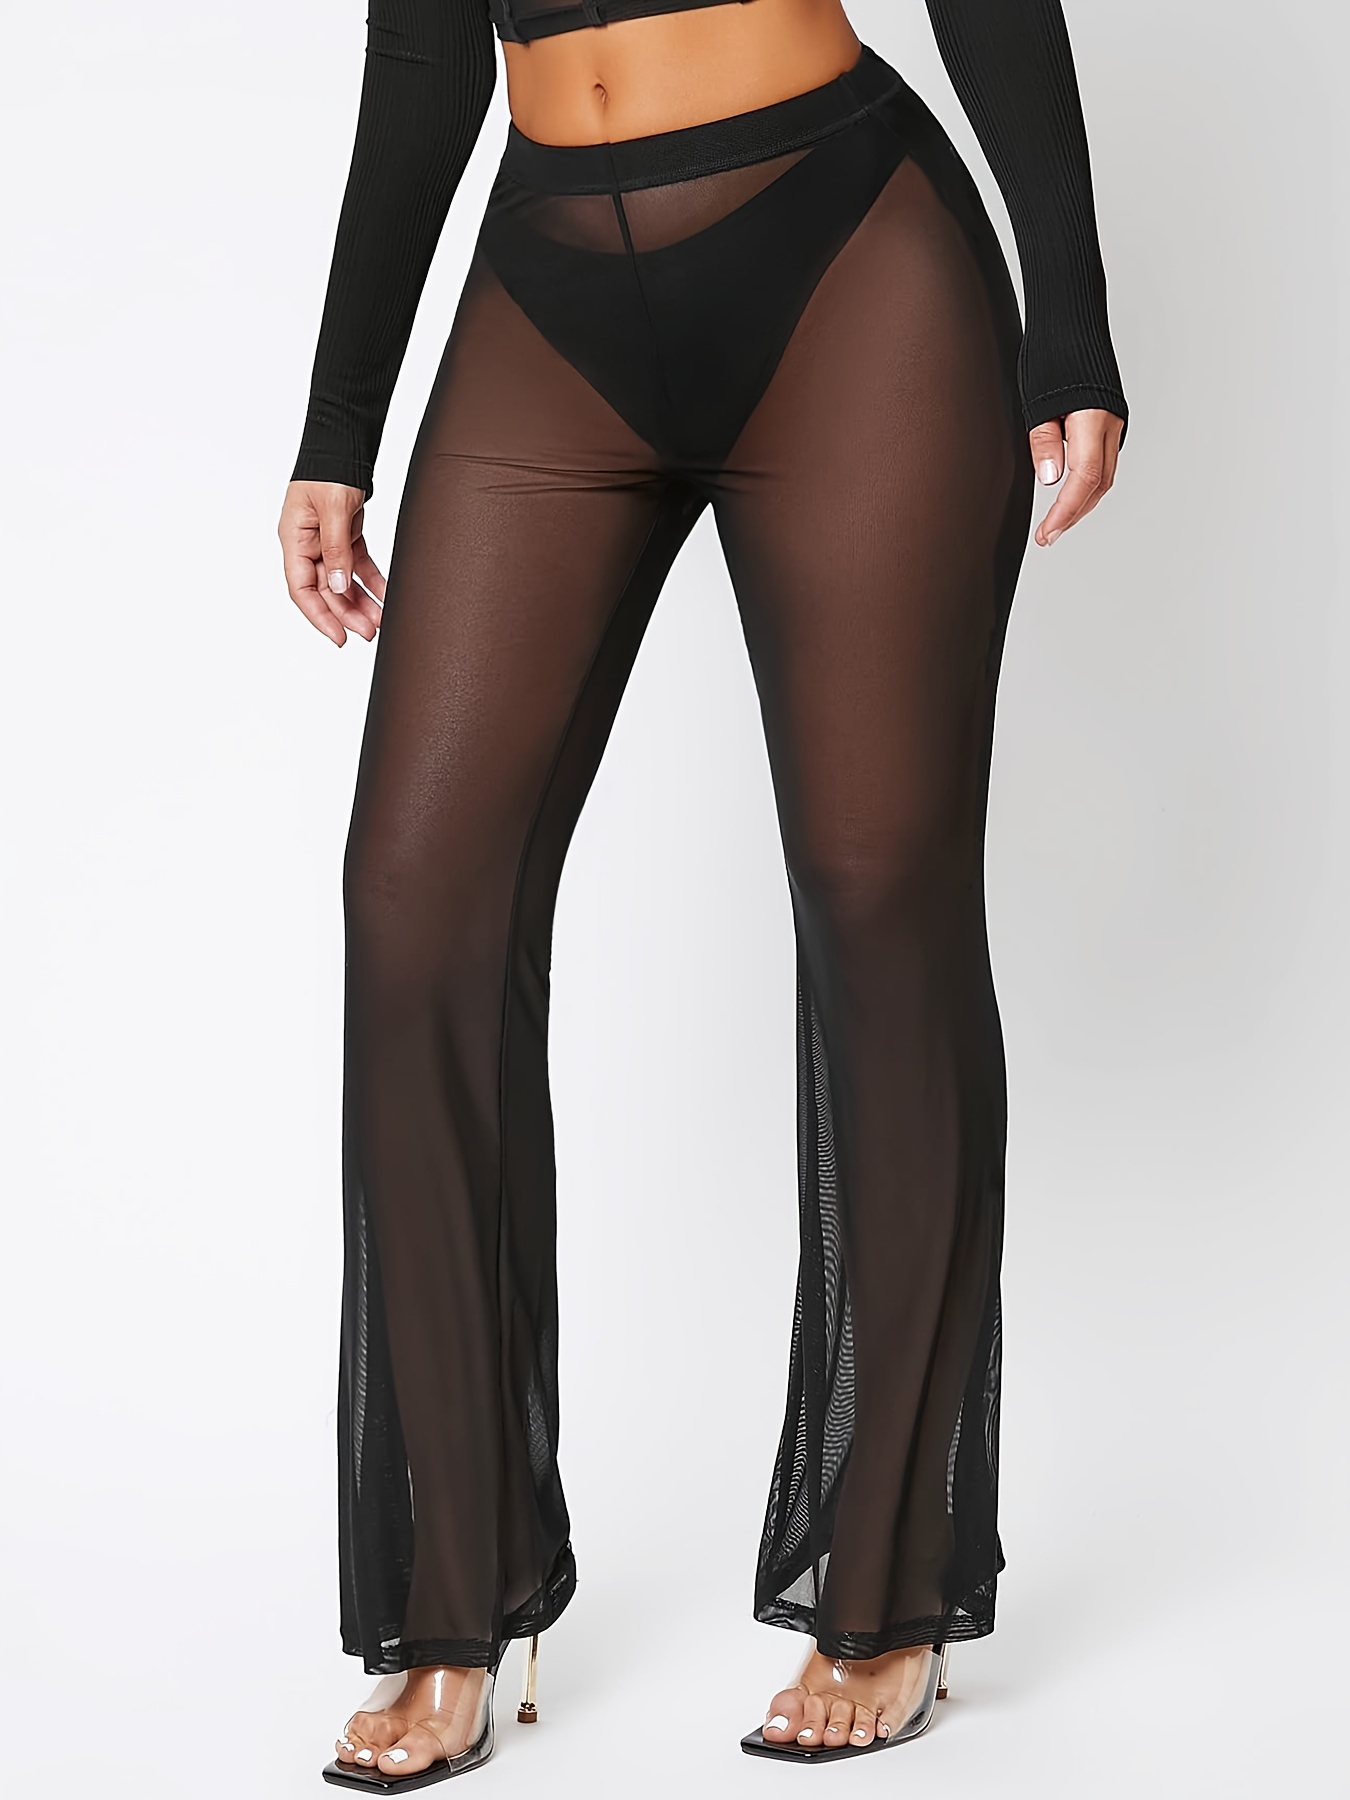 High Waist Mesh Forbidden Pants, Sexy Pants For Club, Party